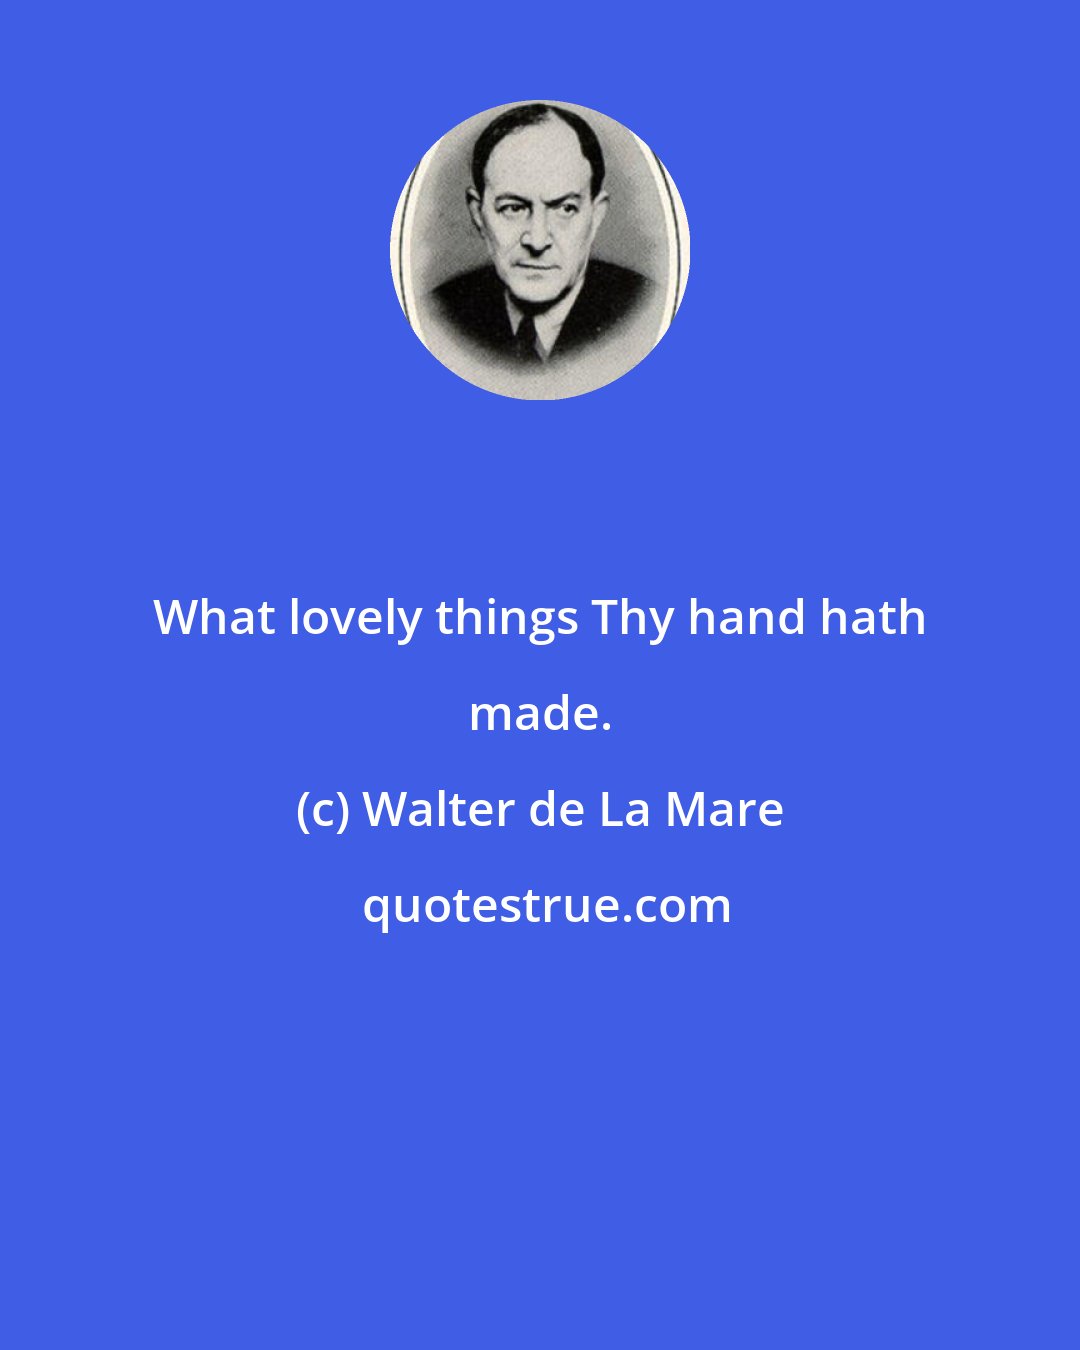 Walter de La Mare: What lovely things Thy hand hath made.